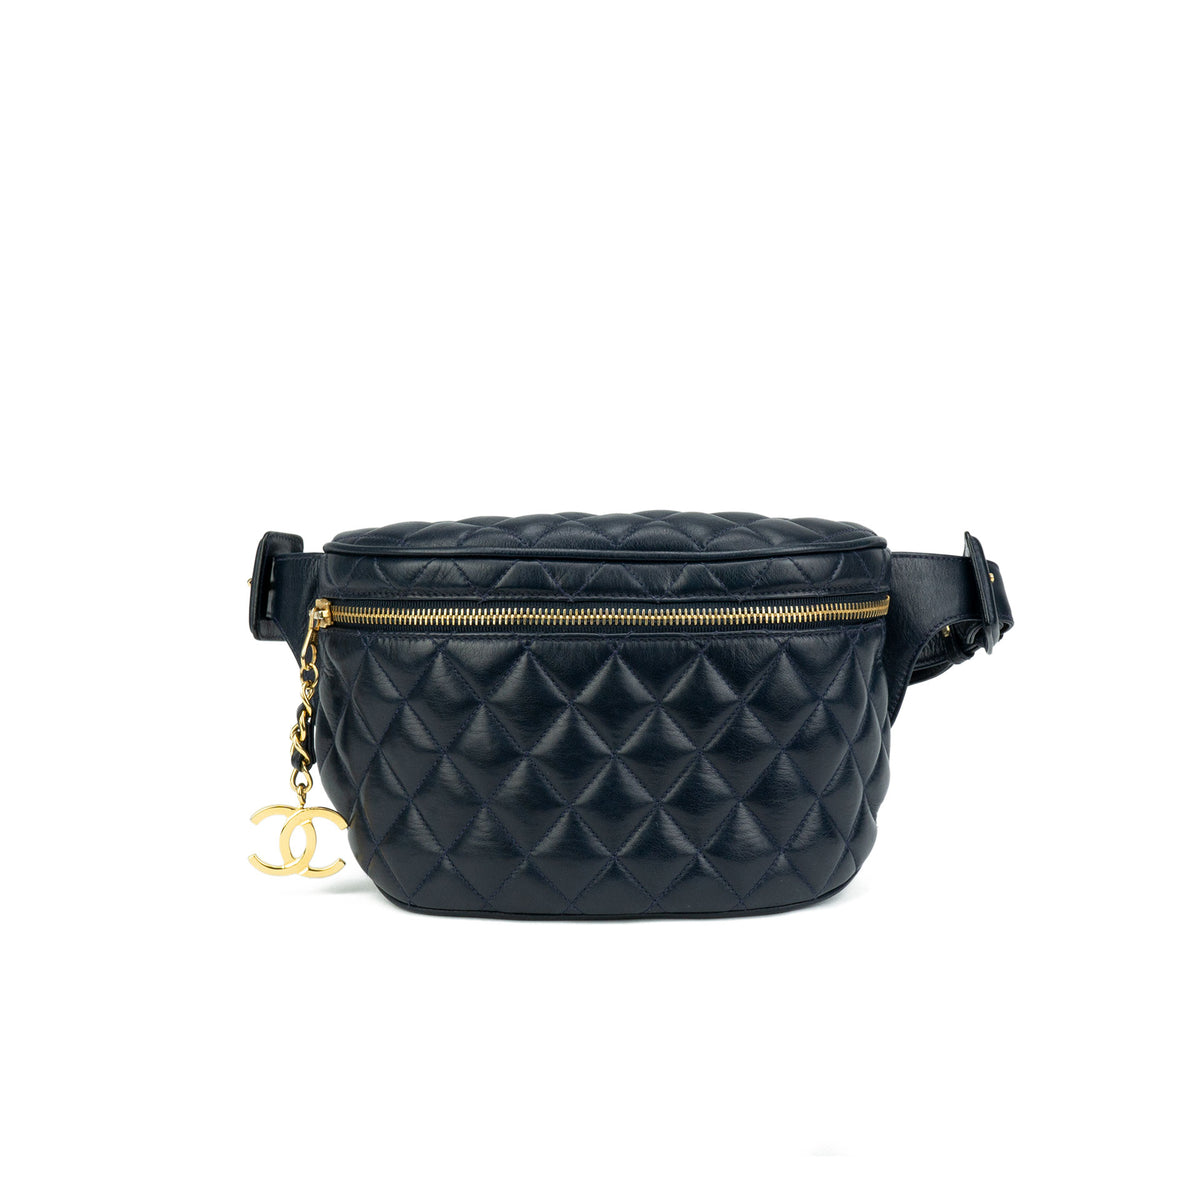 Chanel Rabbit Fur Waist Fanny Pack – House of Carver